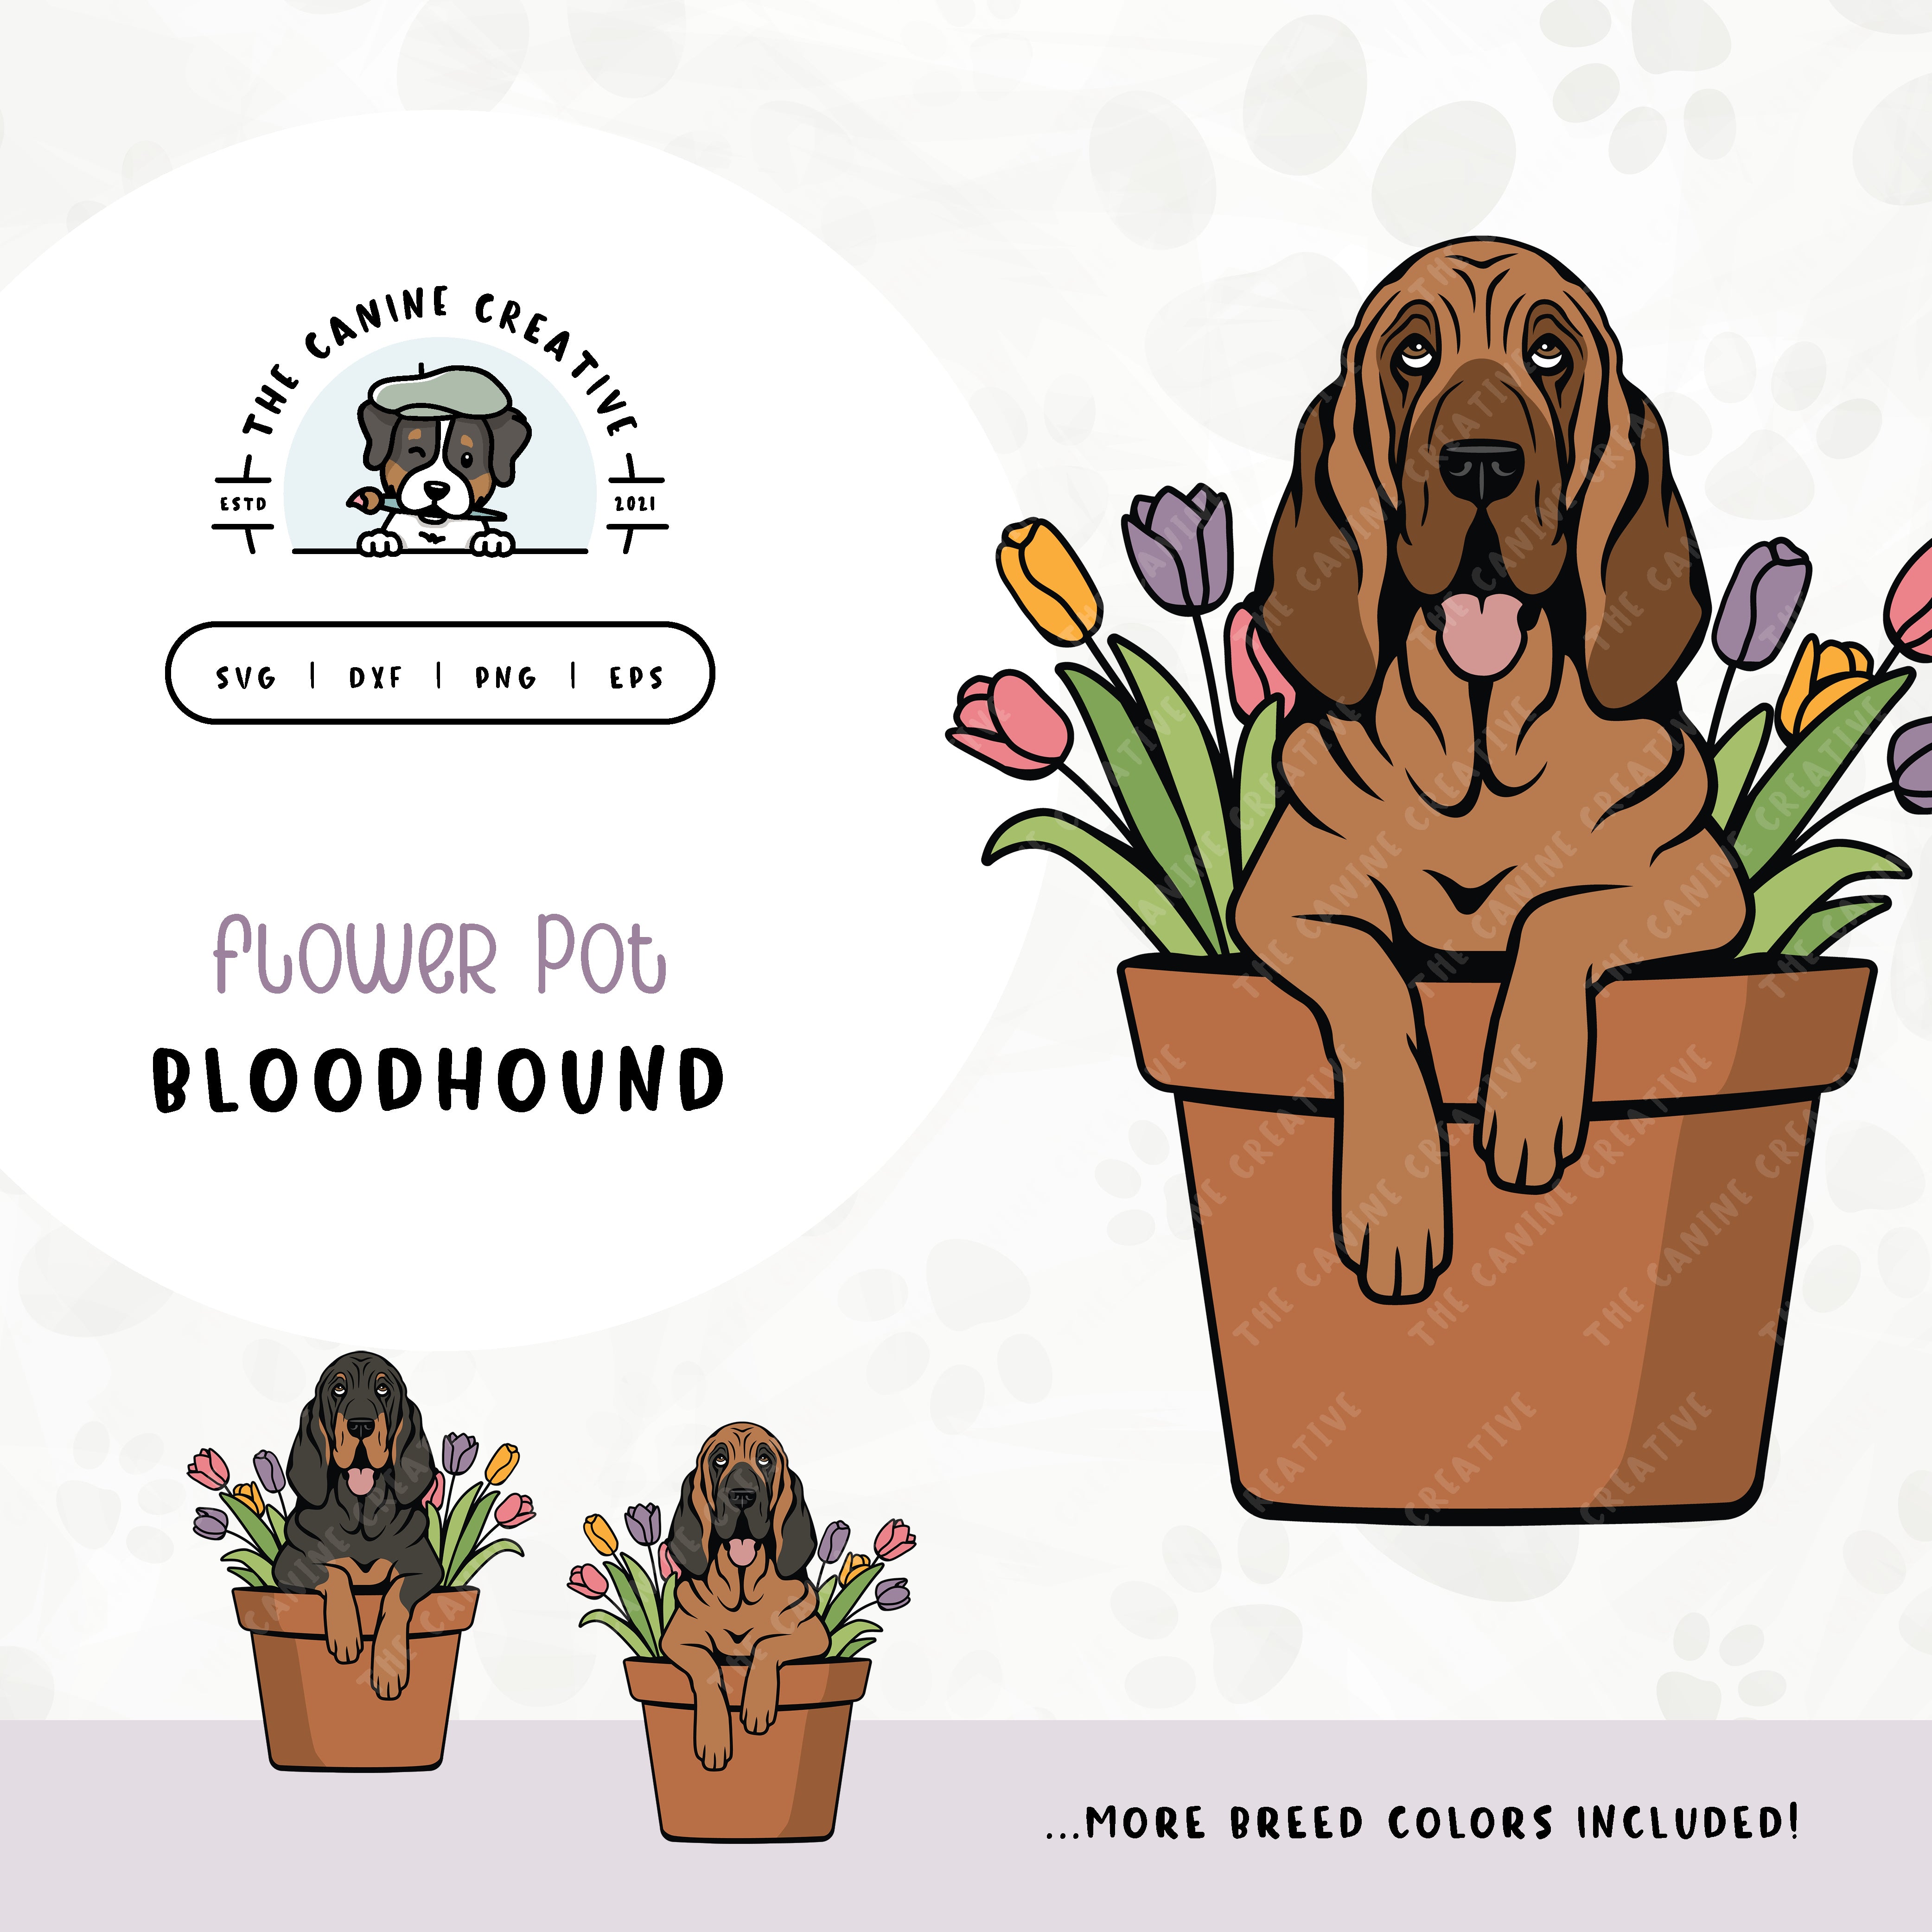 This springtime illustration features a Bloodhound peeking out of a pot of vibrant tulips. File formats include: SVG, DXF, PNG, and EPS.